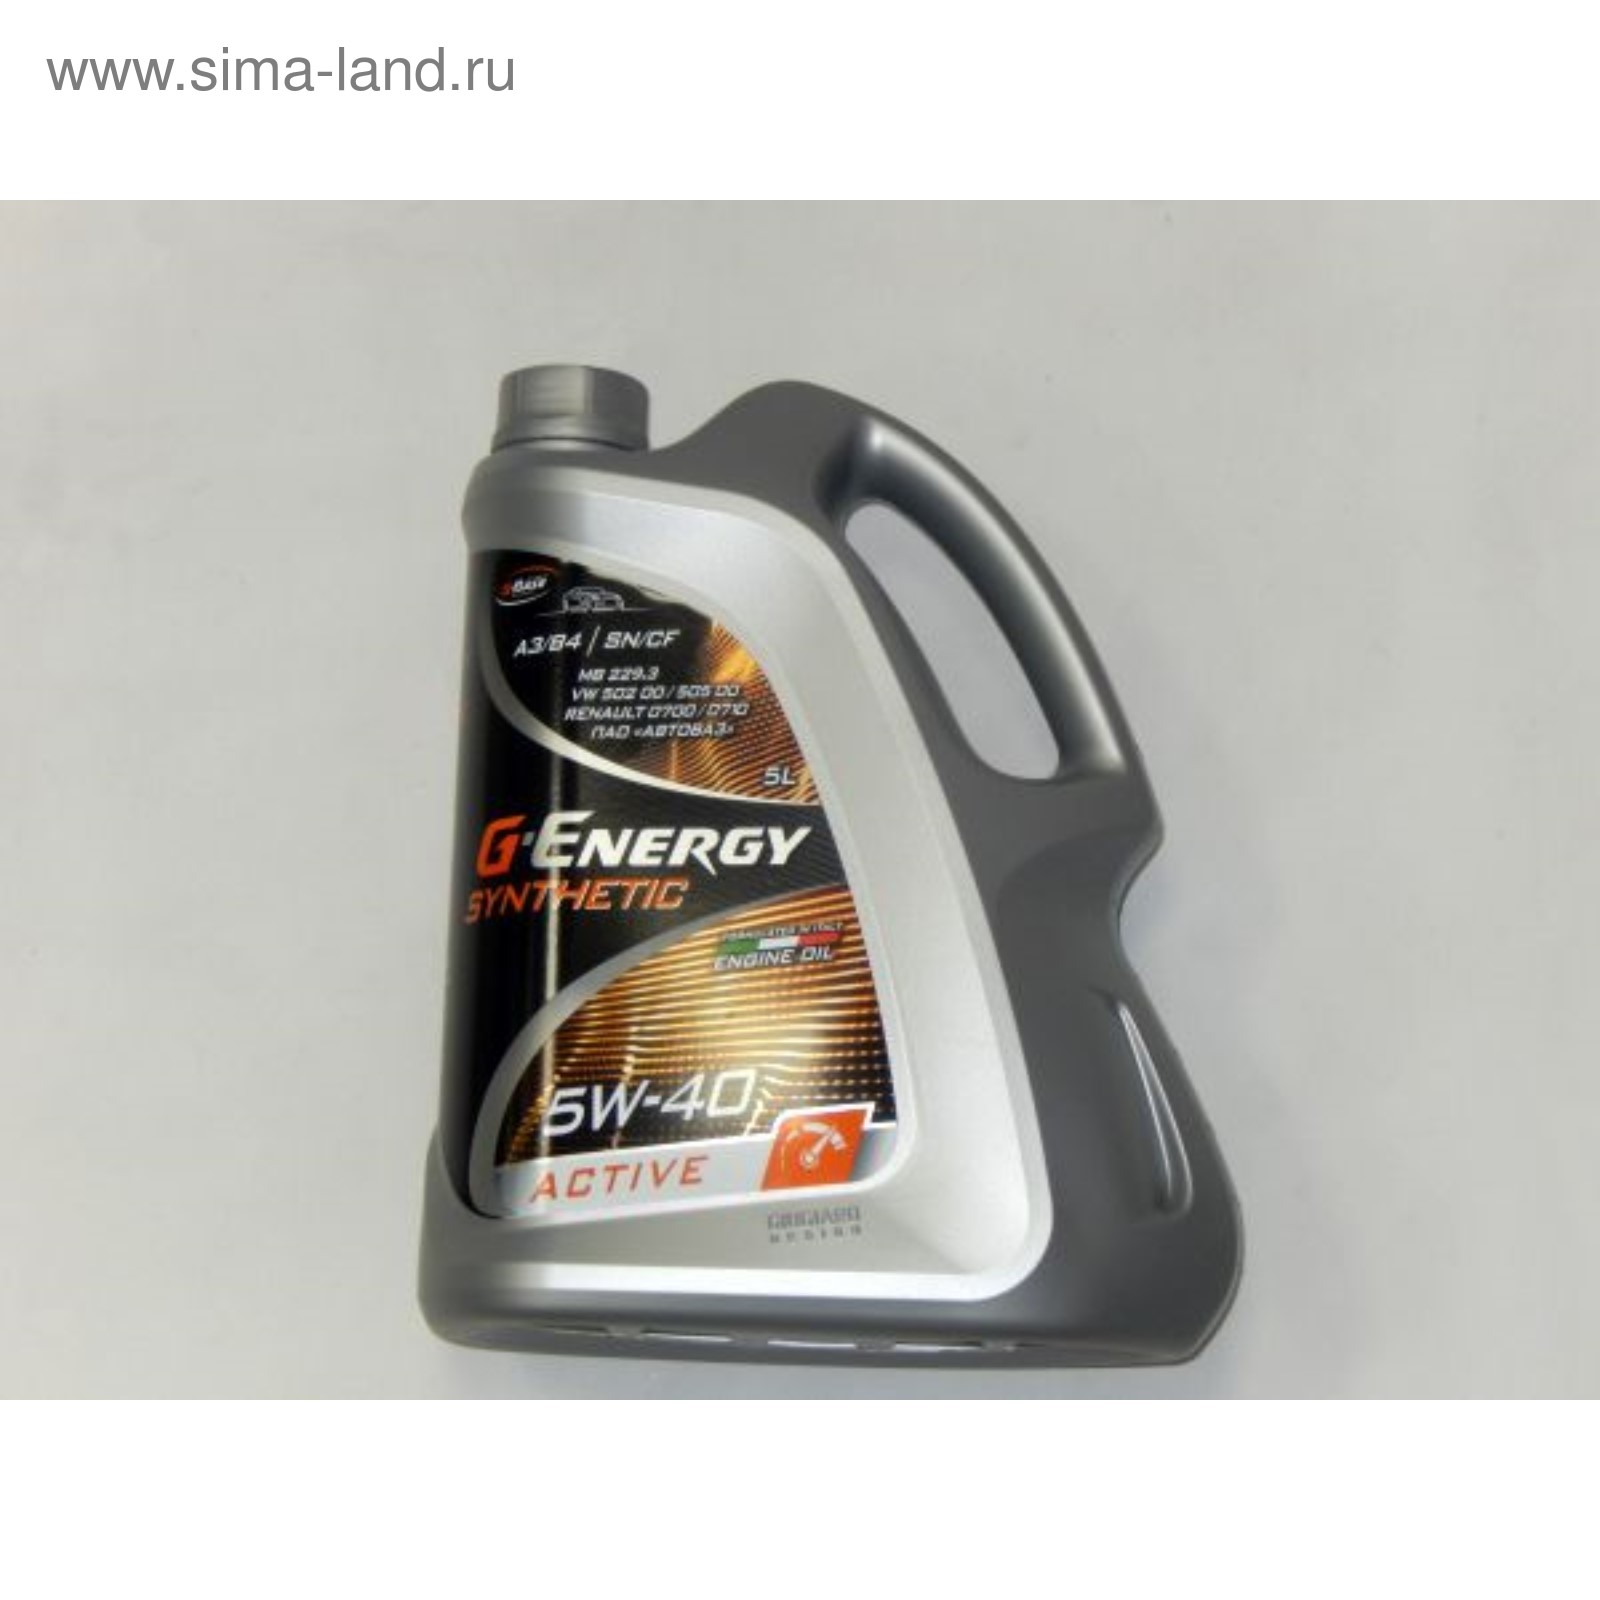 Моторное масло актив. G Energy 5w30 Active. Масло g Energy 5w40 Active. G-Energy Synthetic Active 5w-30 4л.